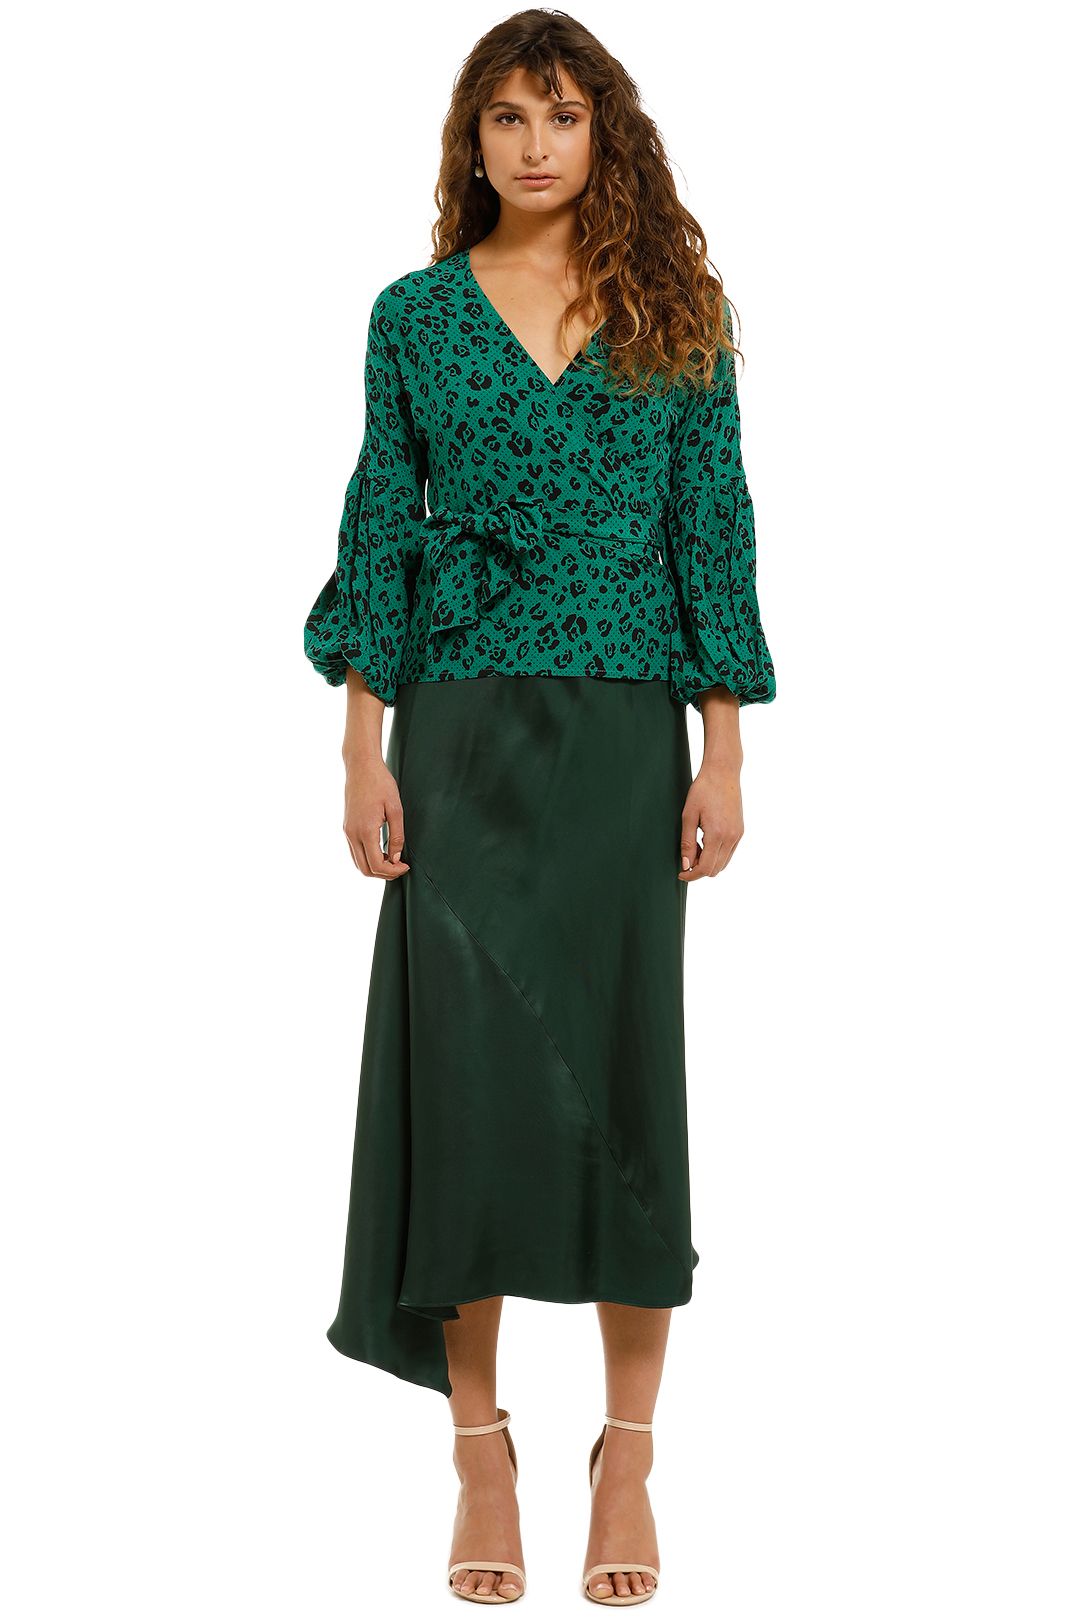 Suboo-Leopard-Lights-Wrap-Long-Sleeve-Top-Green-Front